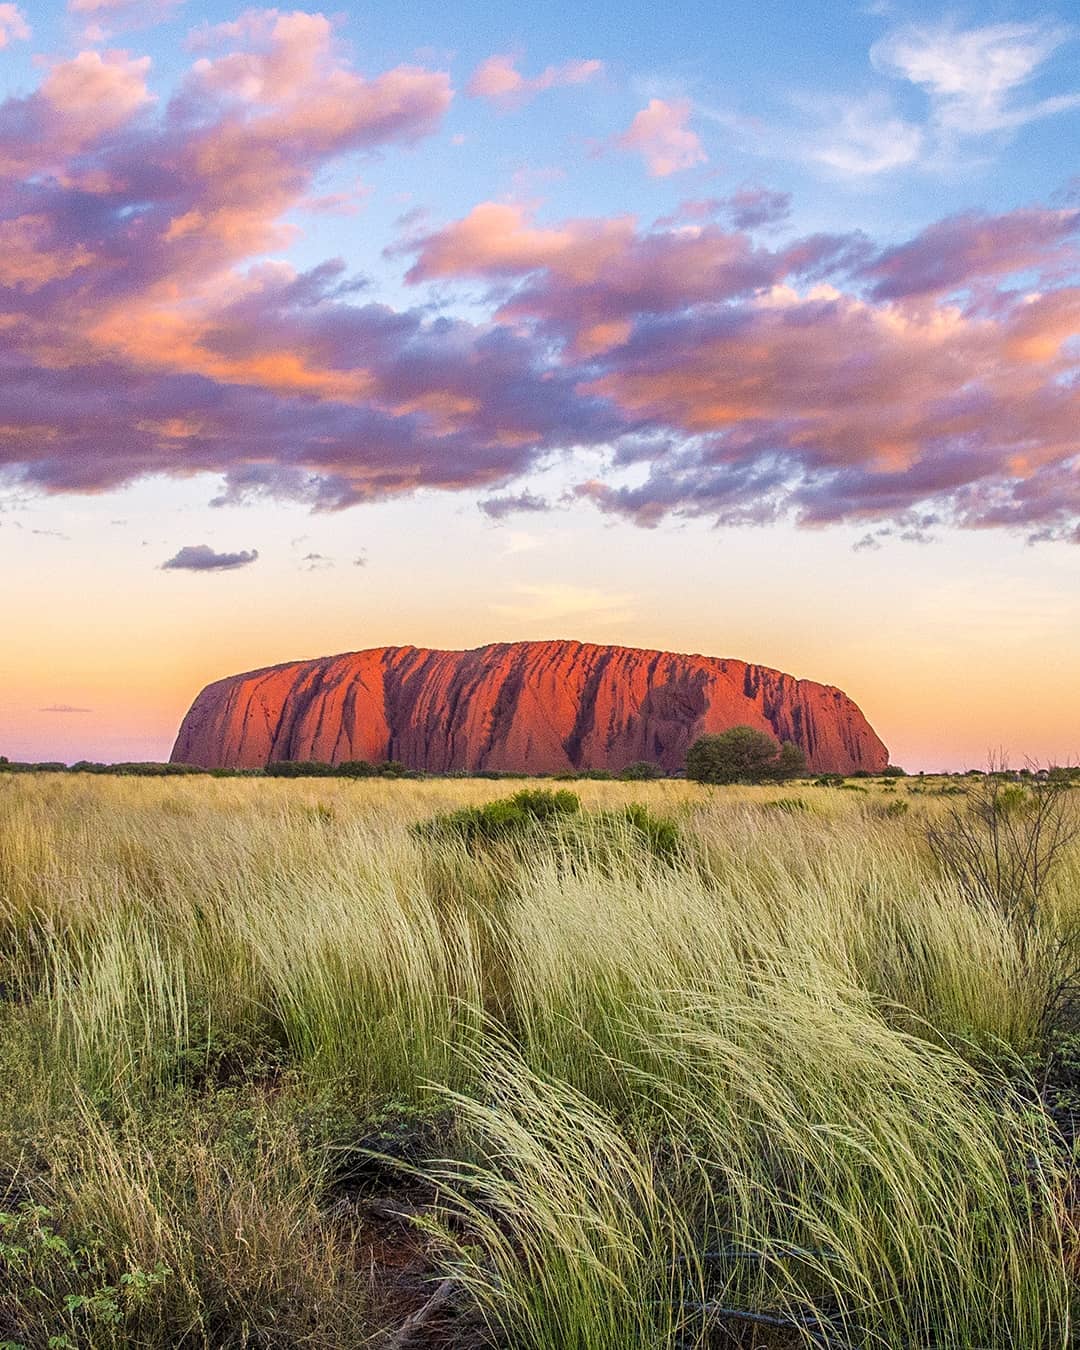 The iconic and striking Uluru (previously Ayers Rock) at its finest during #sunset in the Northern Territory in Australia. ⠀⠀
⠀⠀
The giant sandstone rock formation is located in Uluru-Kata Tjuta National Park, 335km (208mi) southwest of the nearest large town, Alice Springs. We hiked around the base of Uluru – a circumference of 9.4km – before watching the sunset when the red rock turns a crimson pink and makes for a stunning and peaceful experience.⠀
-⠀⠀
-⠀⠀
-⠀⠀
-⠀⠀
-⠀⠀
#Australia #seeaustralia #Uluru #ayersrock #ulurukatatjutanationalpark #ulurusunset #visituluru #visitaustralia #northernterritory #visitnorthernterritory #ntaustralia #katatjuta  #alicesprings #therocktour #theoutback #outback #outbackaustralia #lppathfinders #wellhiked #stayandwander #takeahike #travelawesome #lpPathfinders #GreyhoundAustralia #exploreuluru @AusOutbackNT #NTaustralia #redcentre